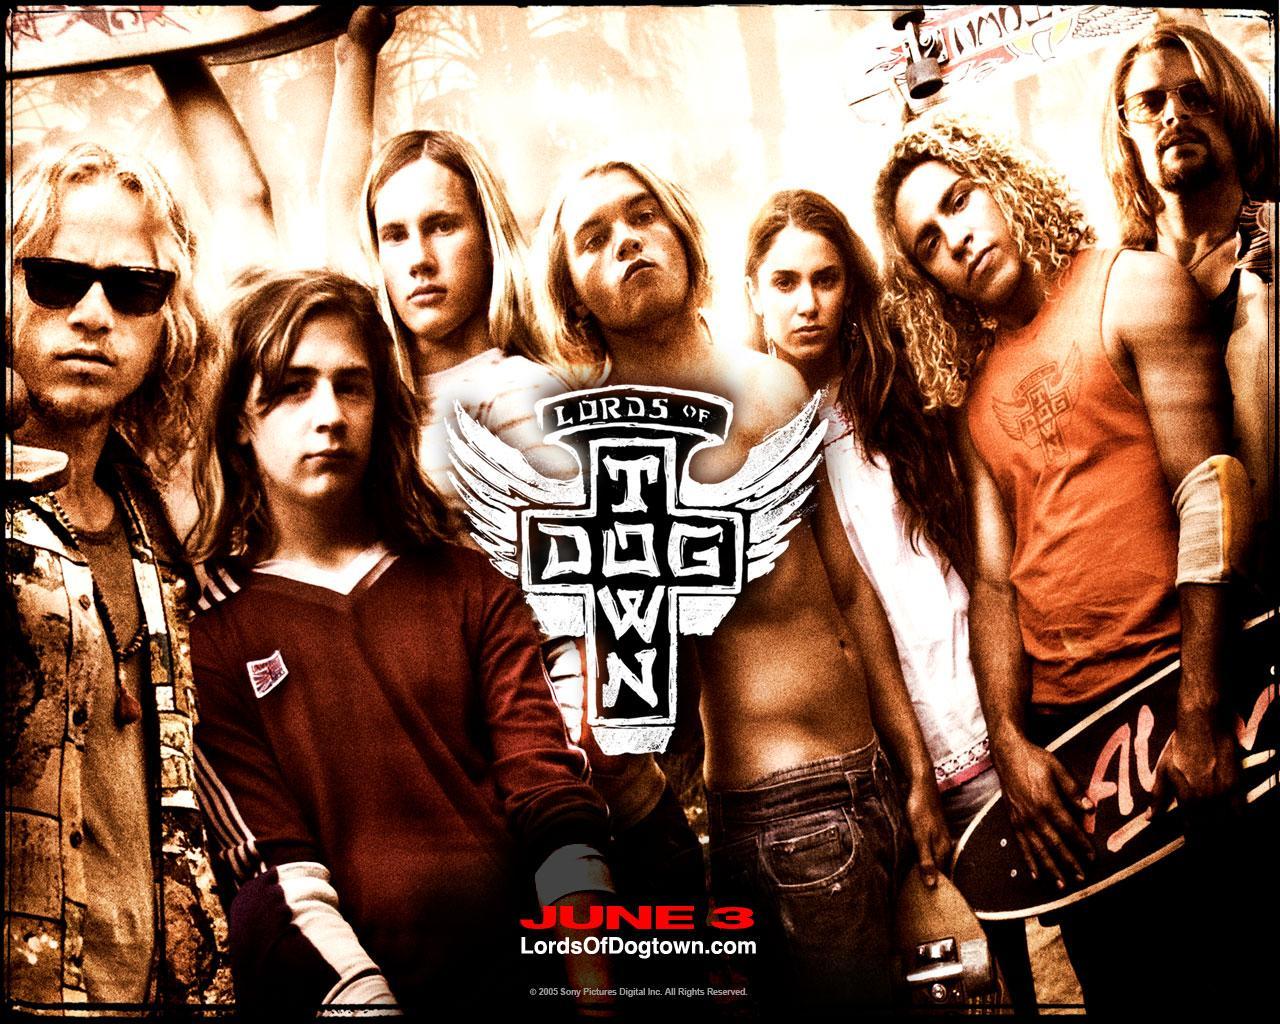  Lords of Dogtown (Unrated Extended Cut) : Emile Hirsch, Victor  Rasuk, John Robinson, Michael Angarano, Nikki Reed, Heath Ledger, Rebecca  De Mornay, Johnny Knoxville, William Mapother, Julio Oscar Mechoso, Vincent  Laresca